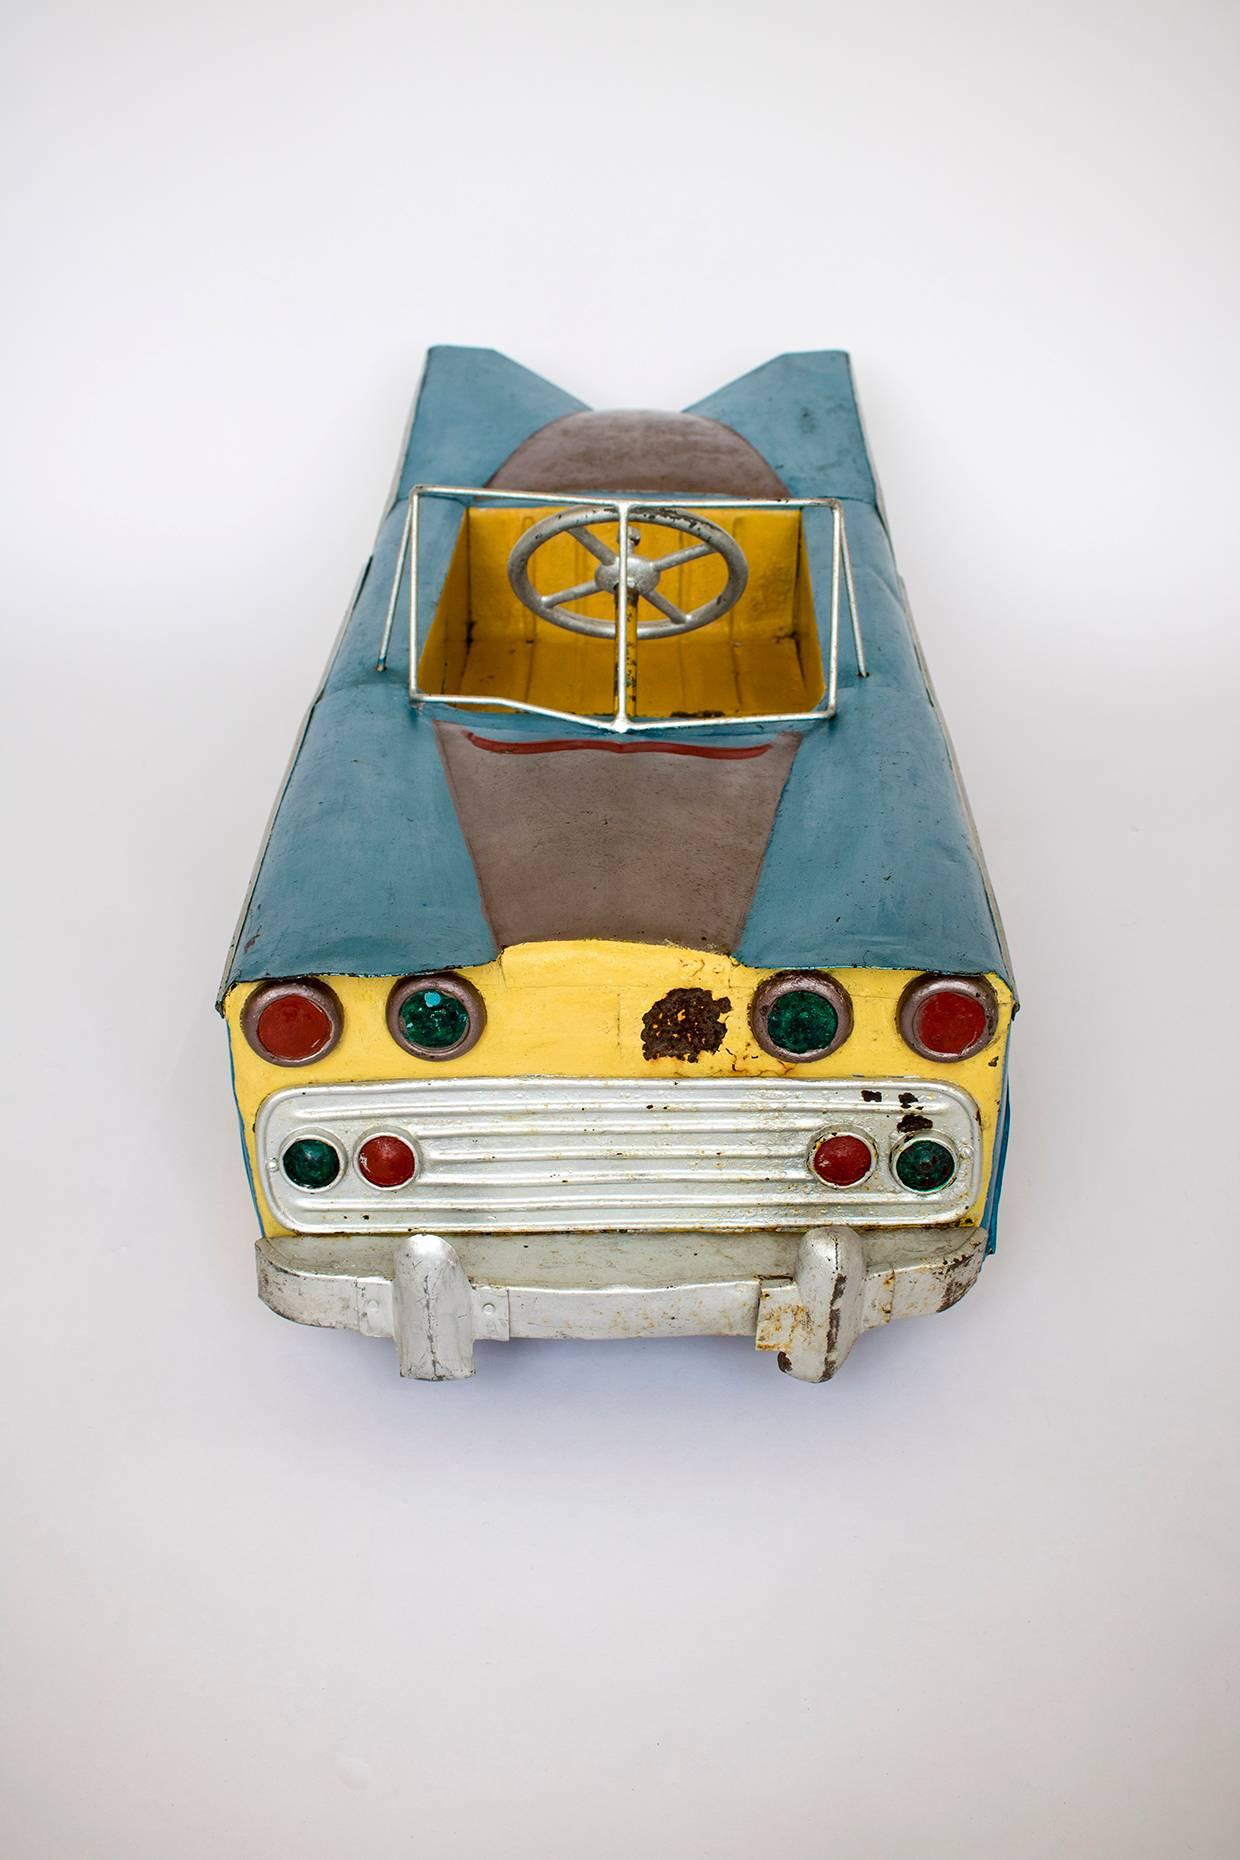 Unusual Burmese Painted Model Pedal Car, circa 1950s -1960s Childs Toy im Angebot 1